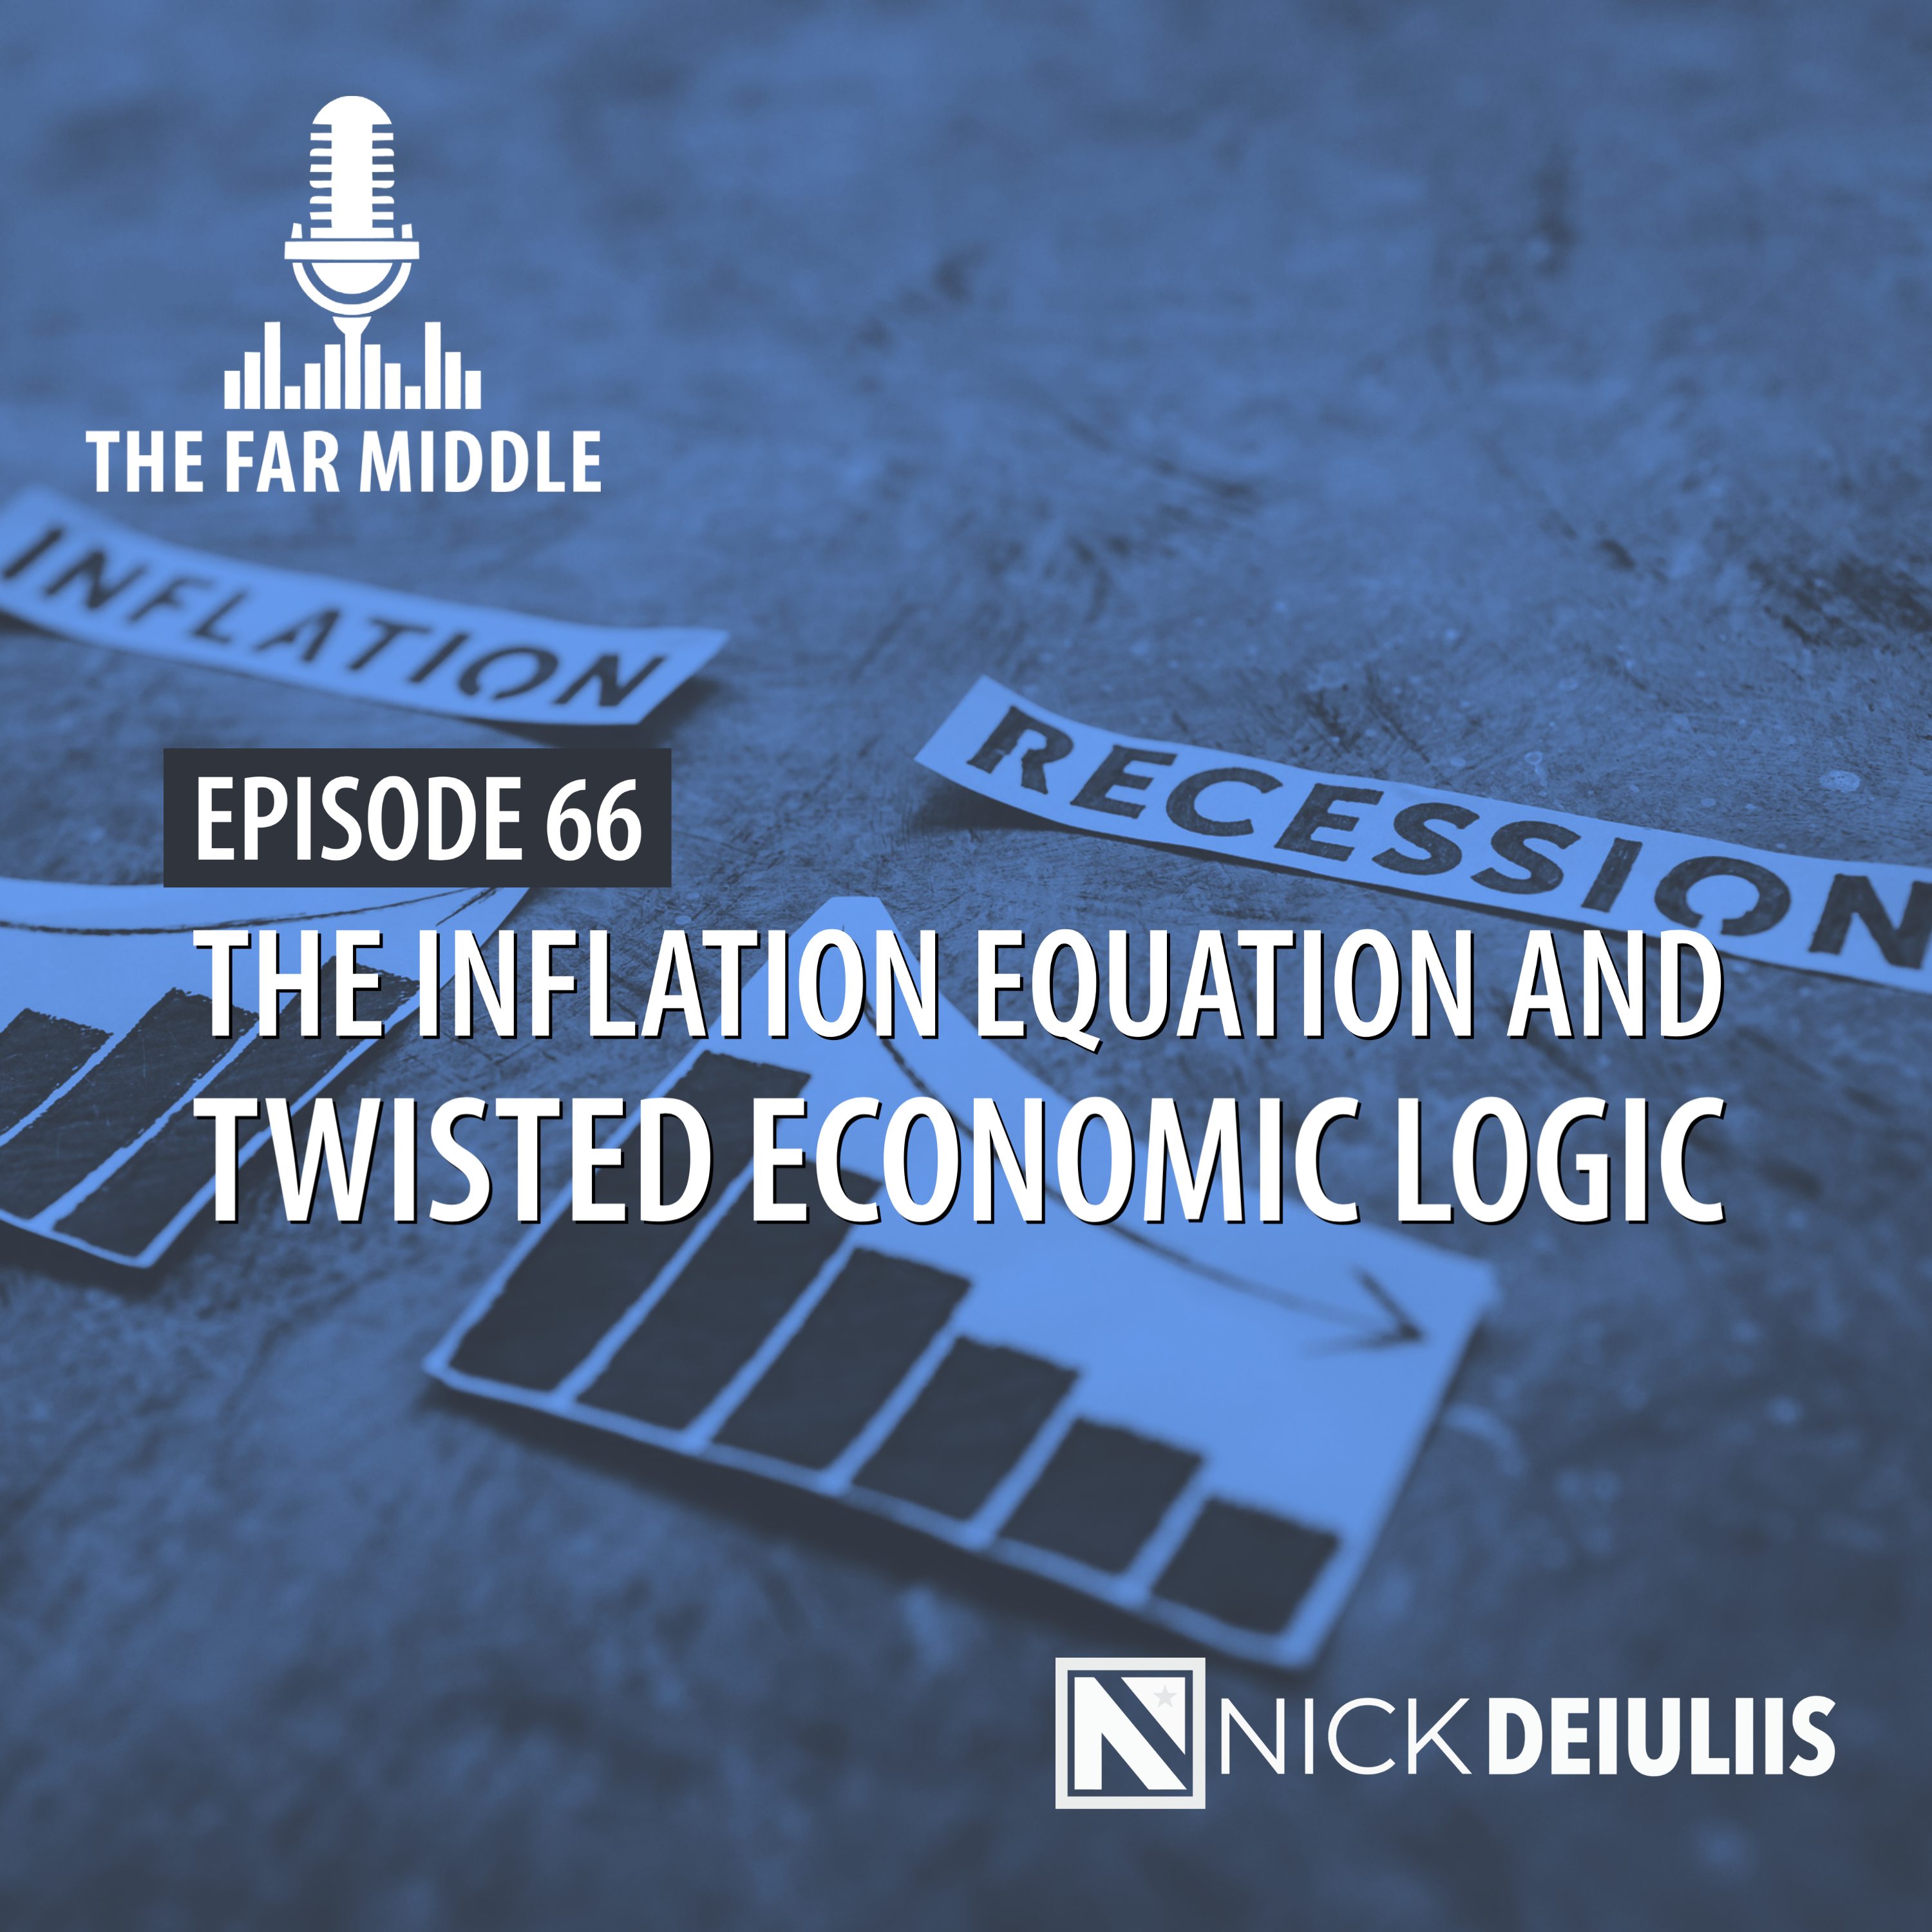 The Inflation Equation and Twisted Economic Logic